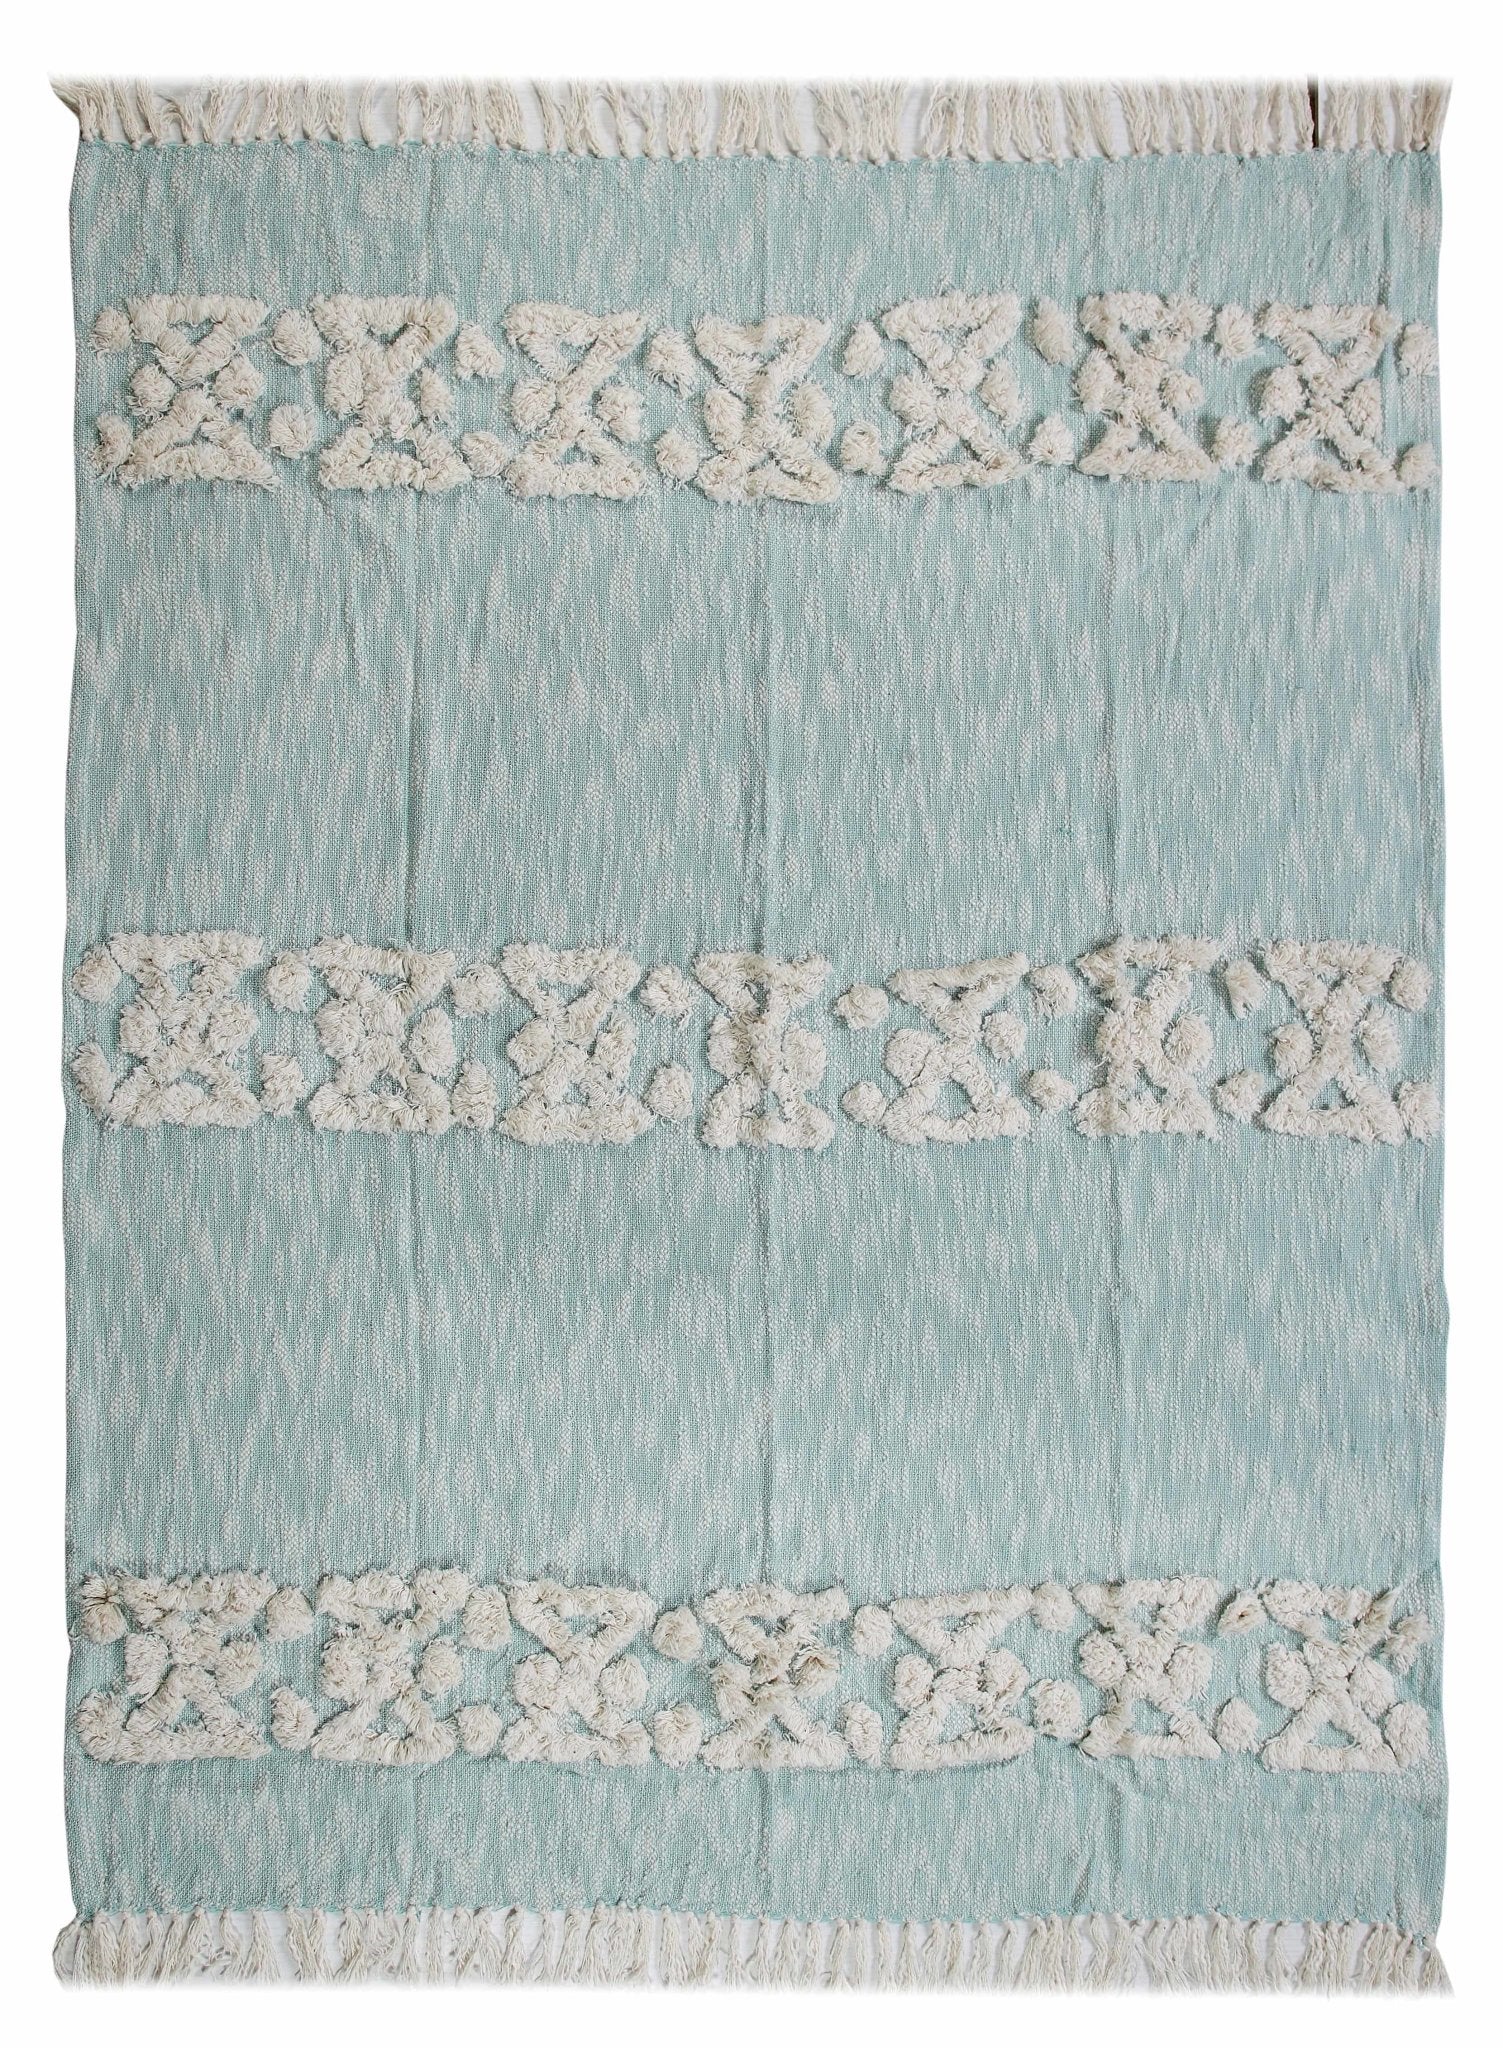 Partly Cloudy LR80141 Throw Blanket - Rug & Home